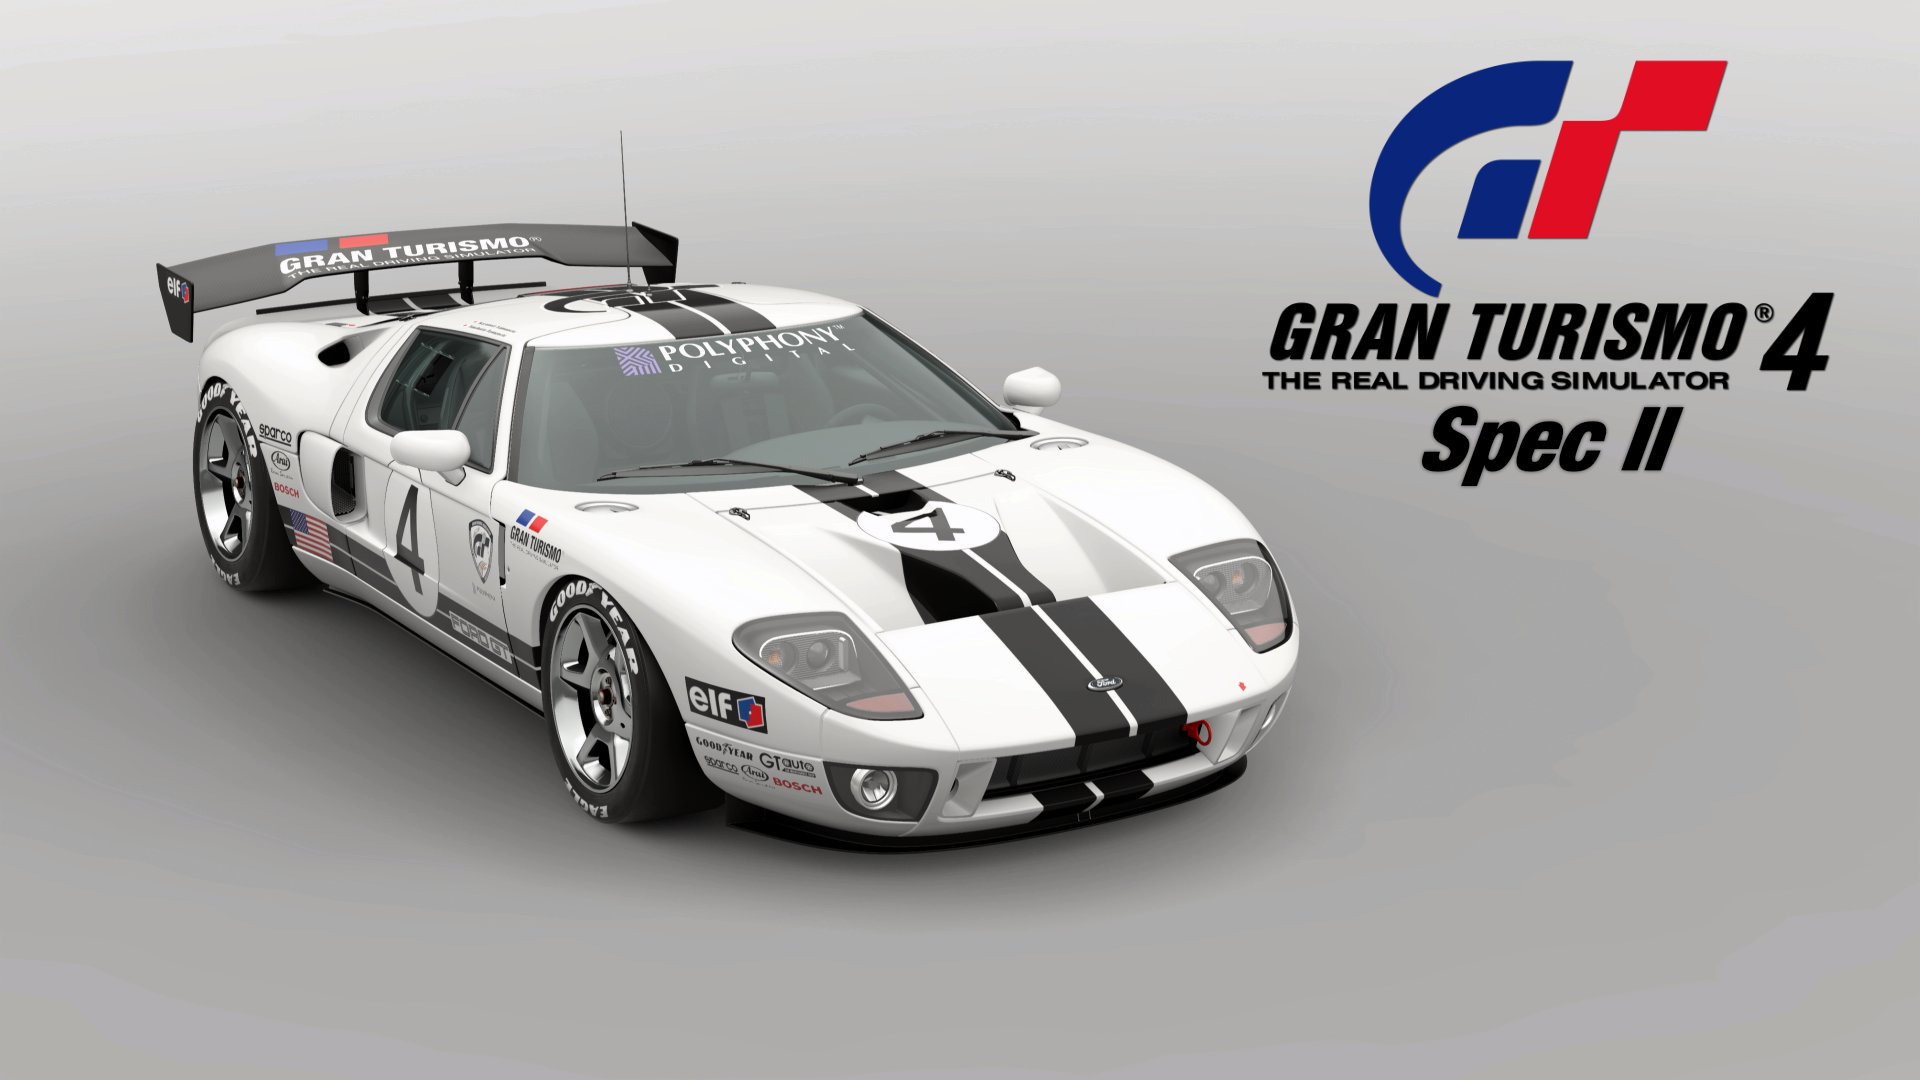 RandomCarGuy17 on X: Something that'll never happen, but is fun to think  about. Gran Turismo 4's Remake, I can see it being fun to play GT4 with  modern physics and visuals. #GT4 #